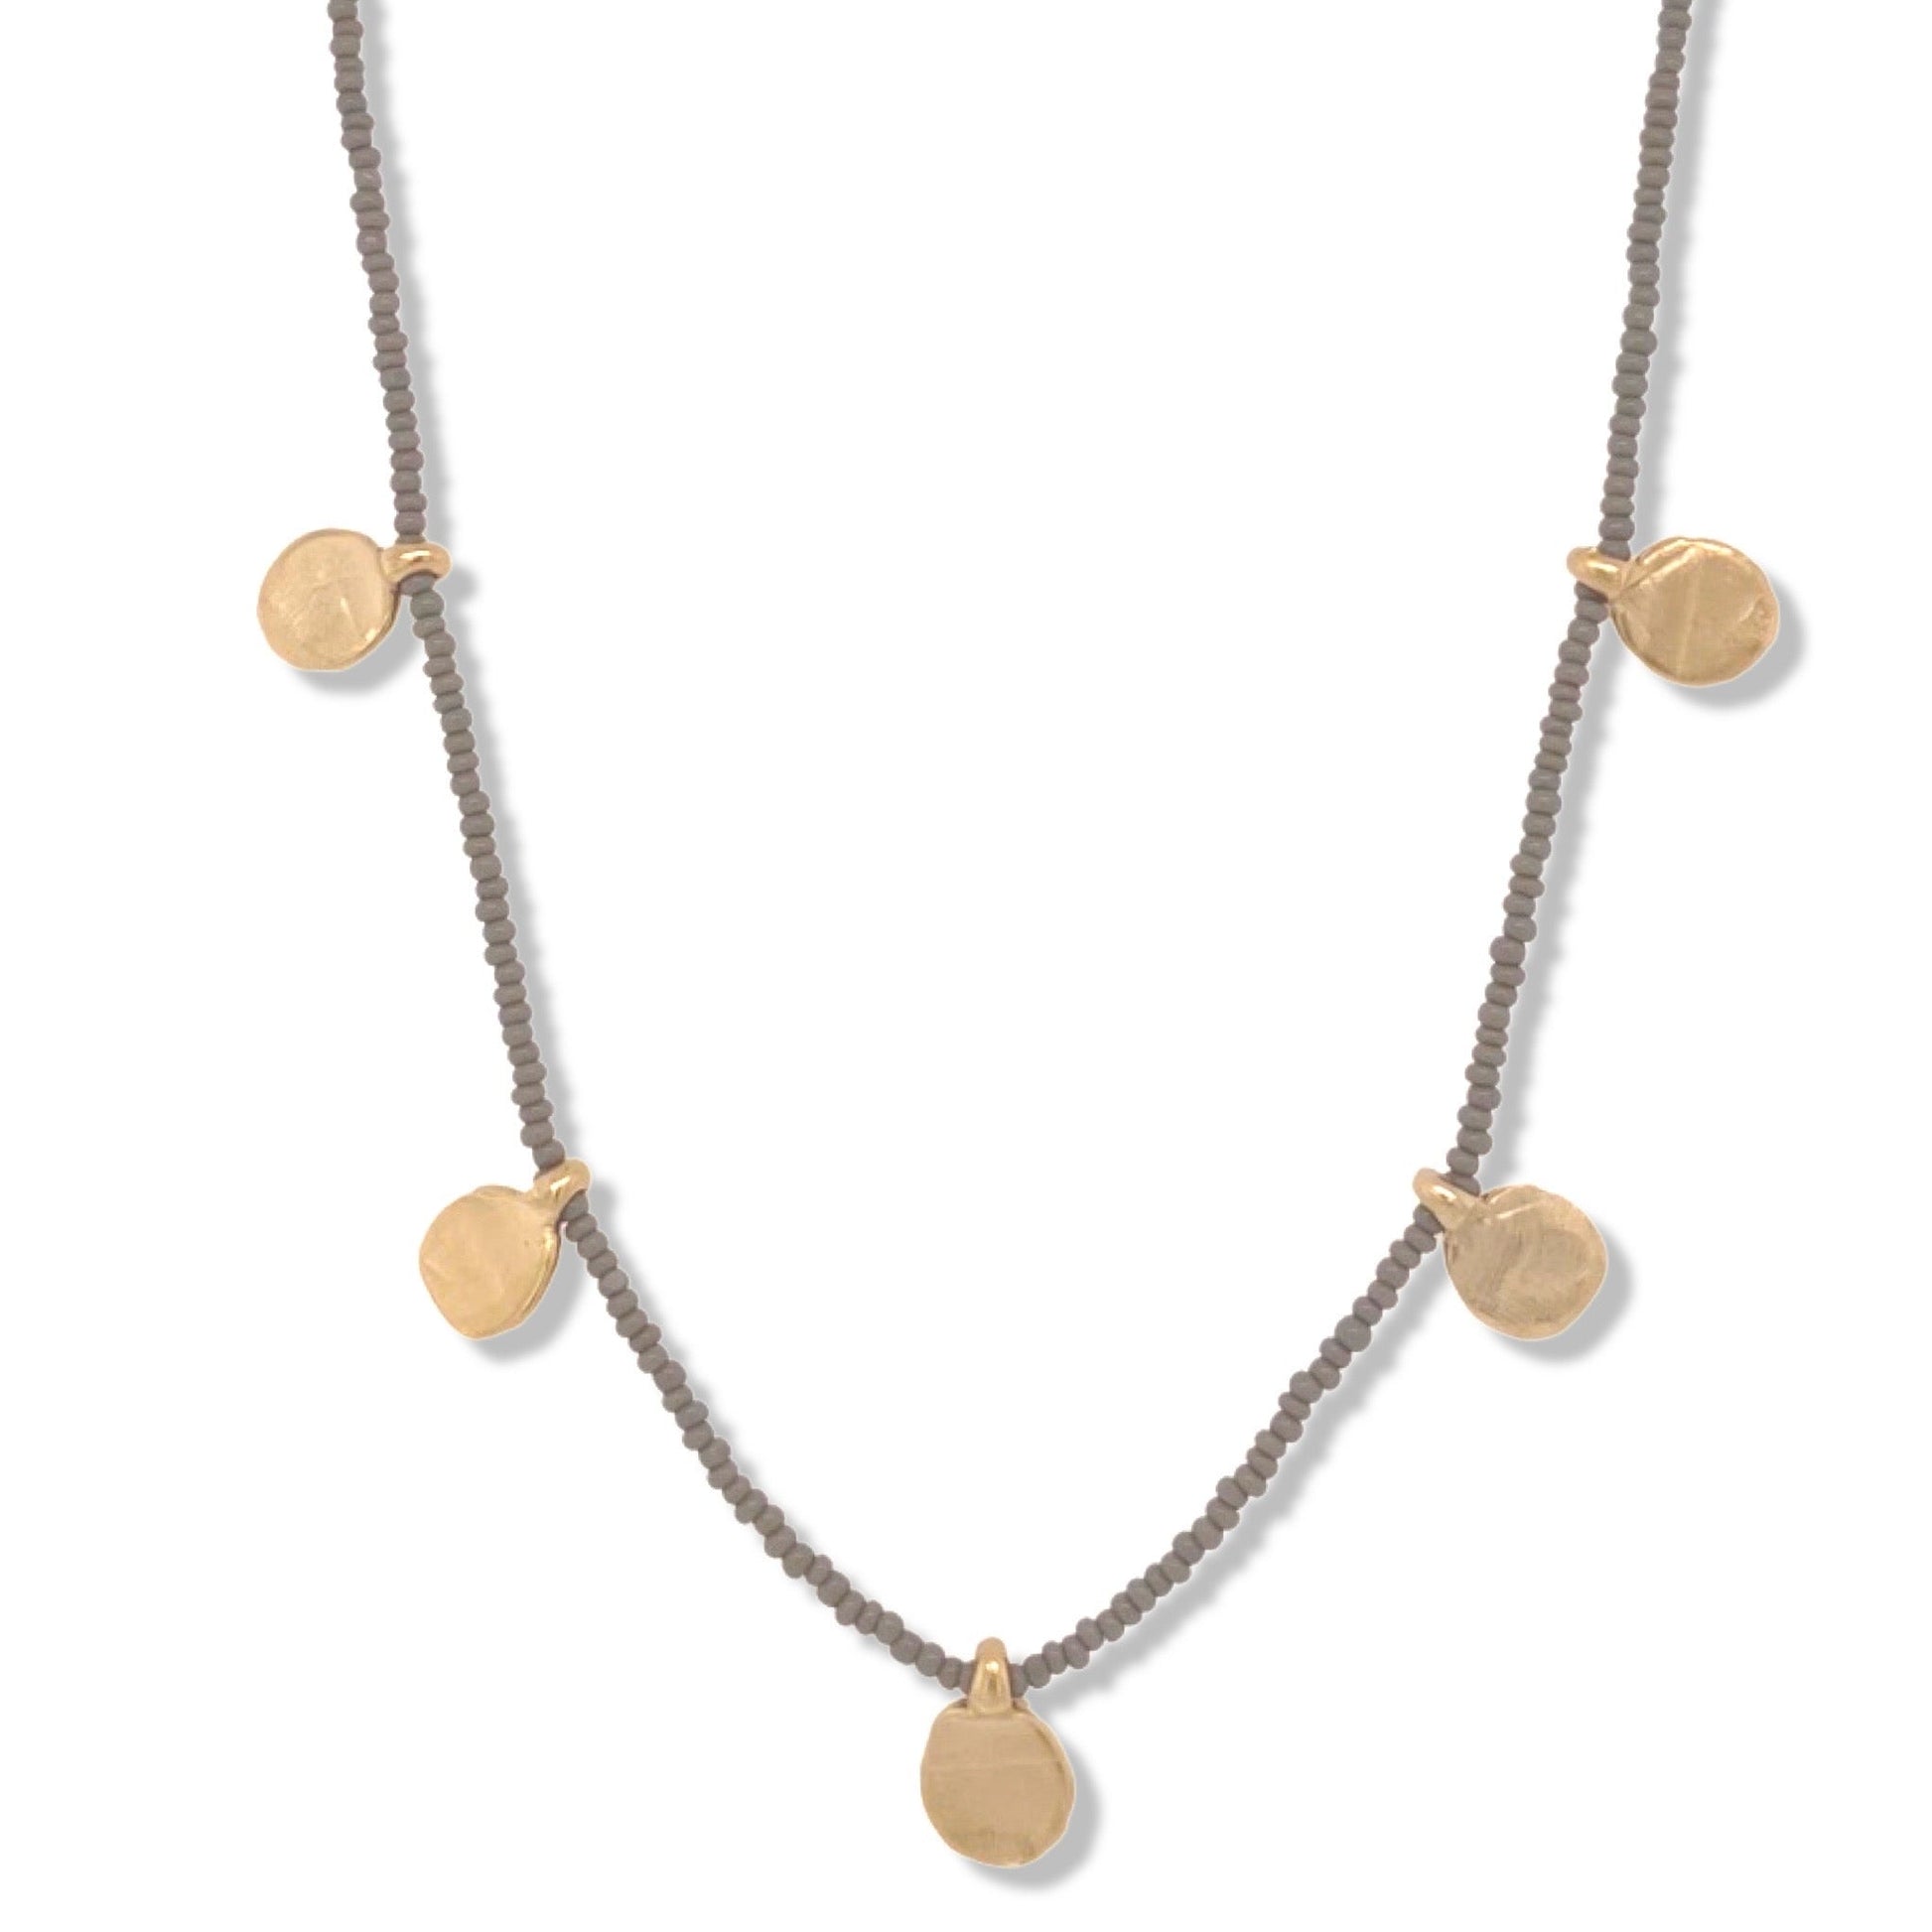 Dot Necklace in Gold on Micro Charcoal Beads | Nalu | Nantucket